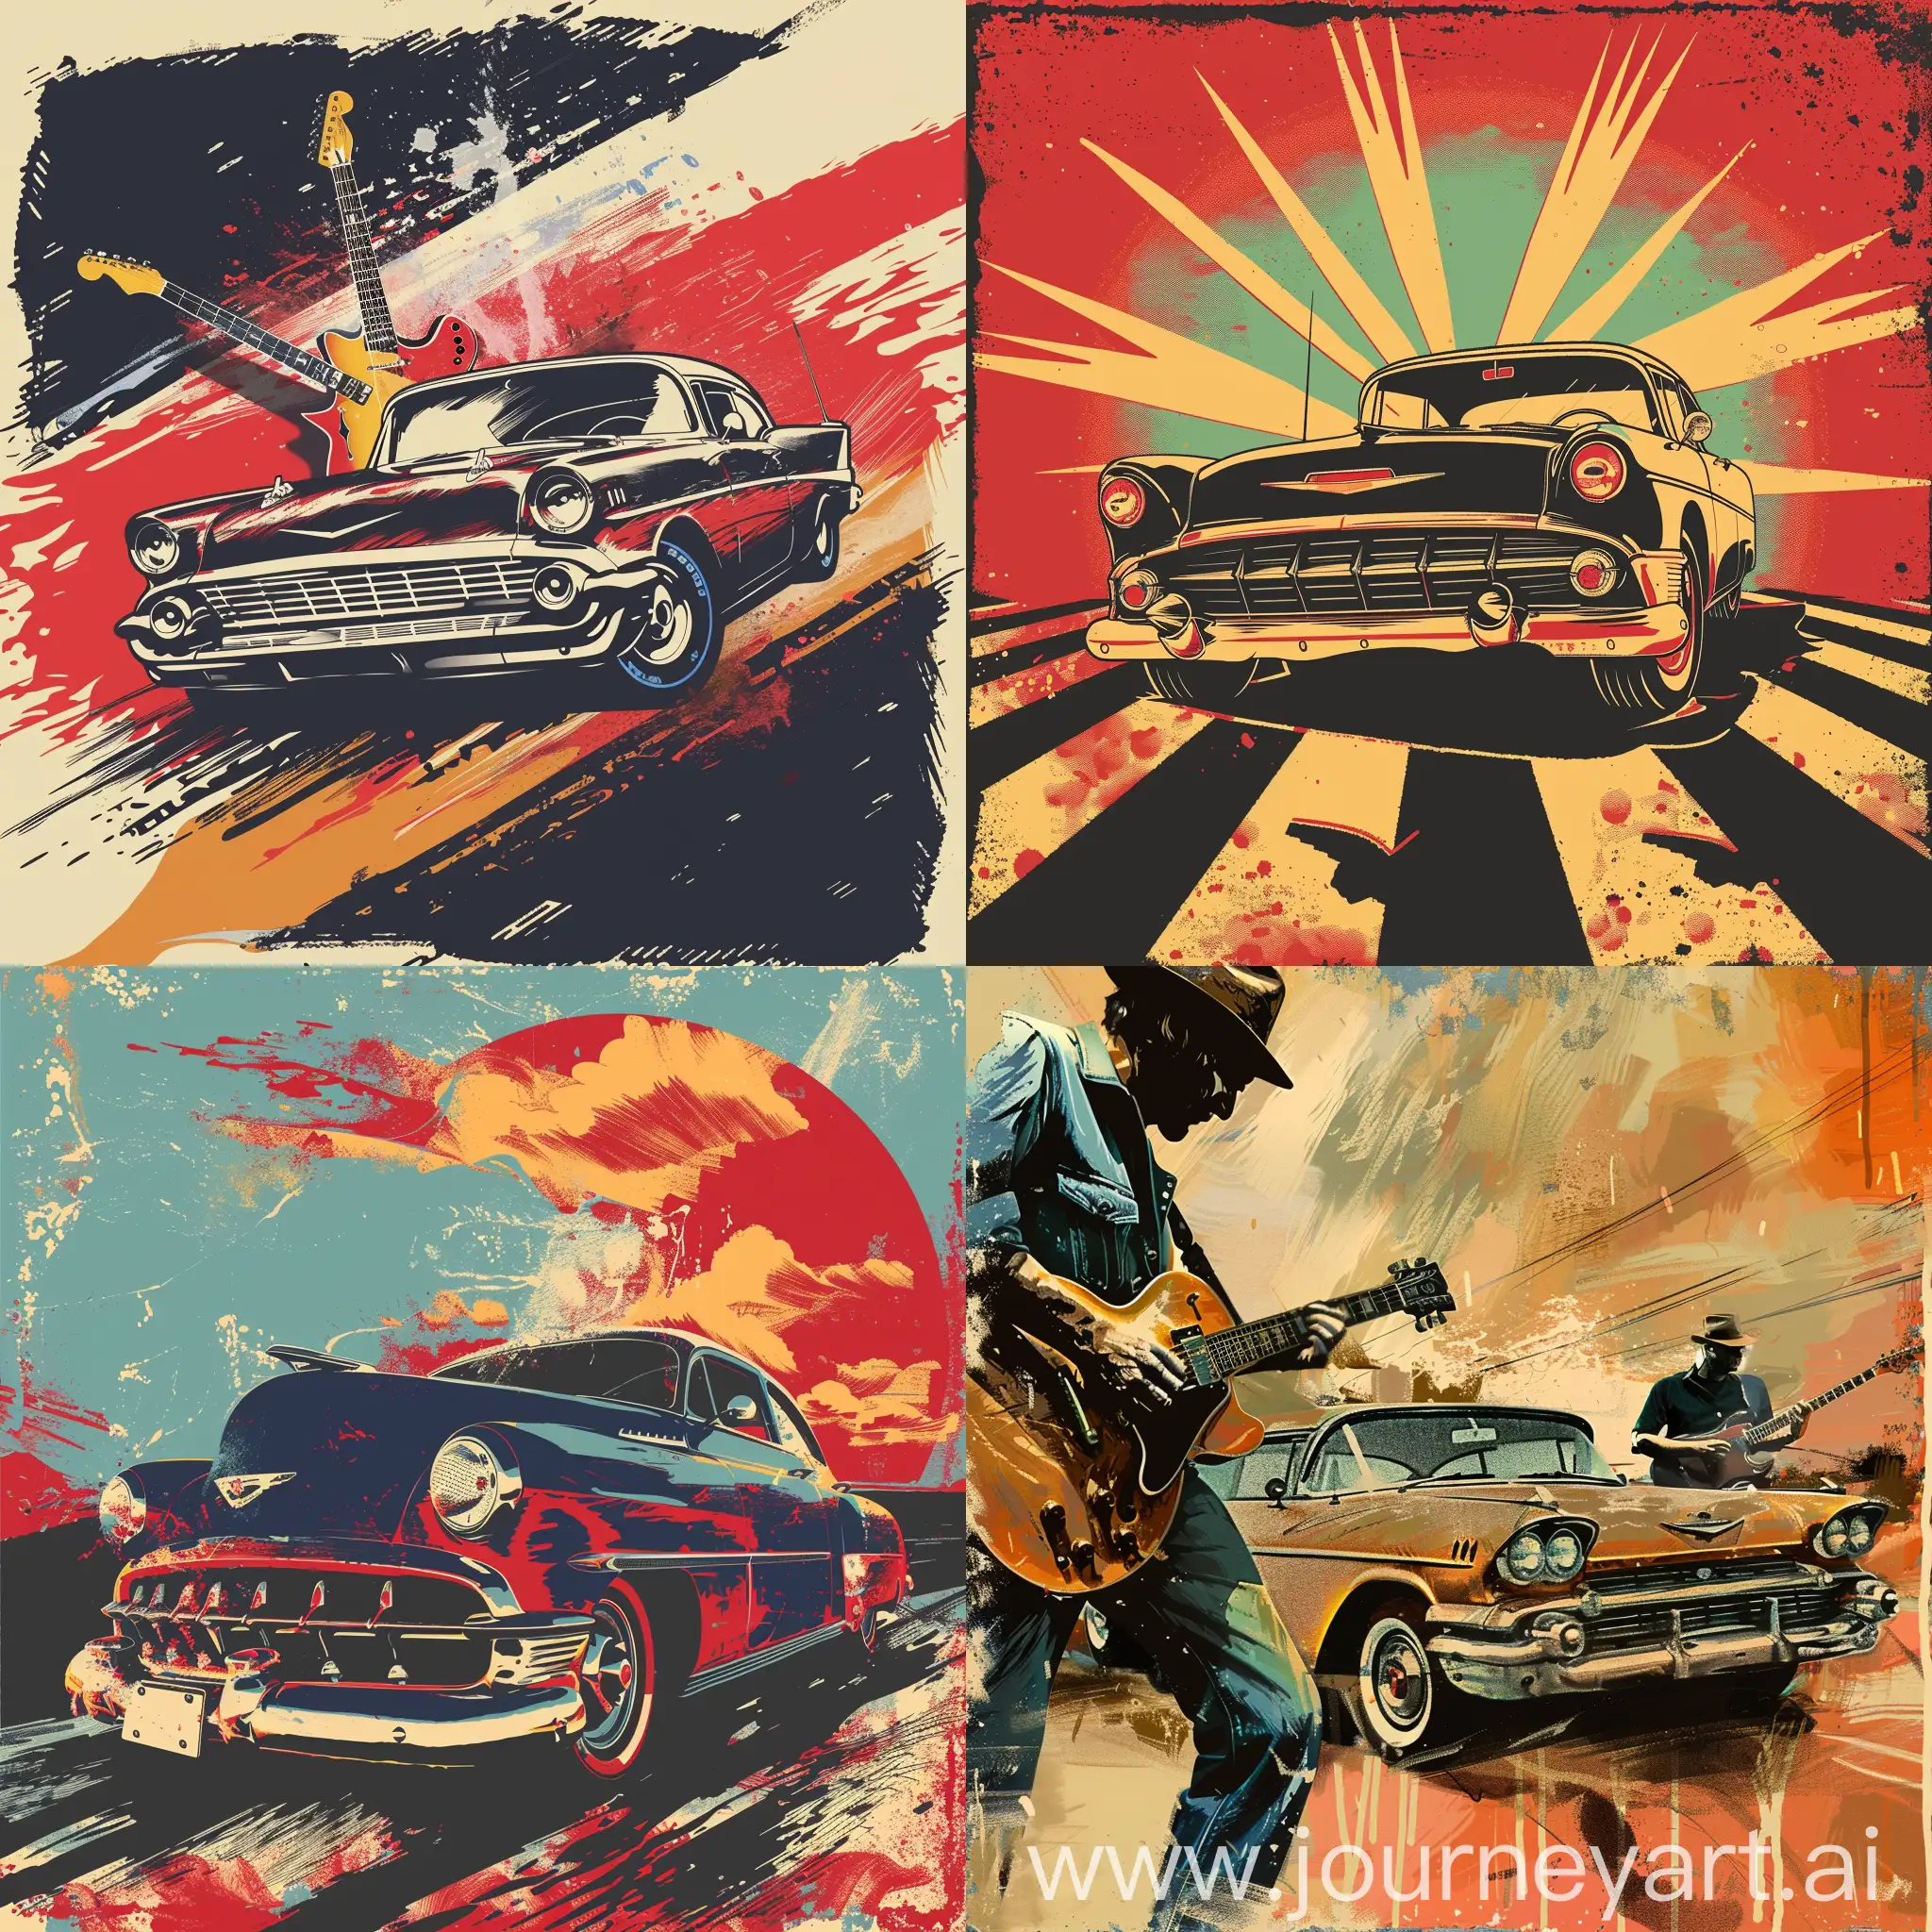 playlist cover for old rock and roll music, guitars, rock band, vintage concert, vintage american car